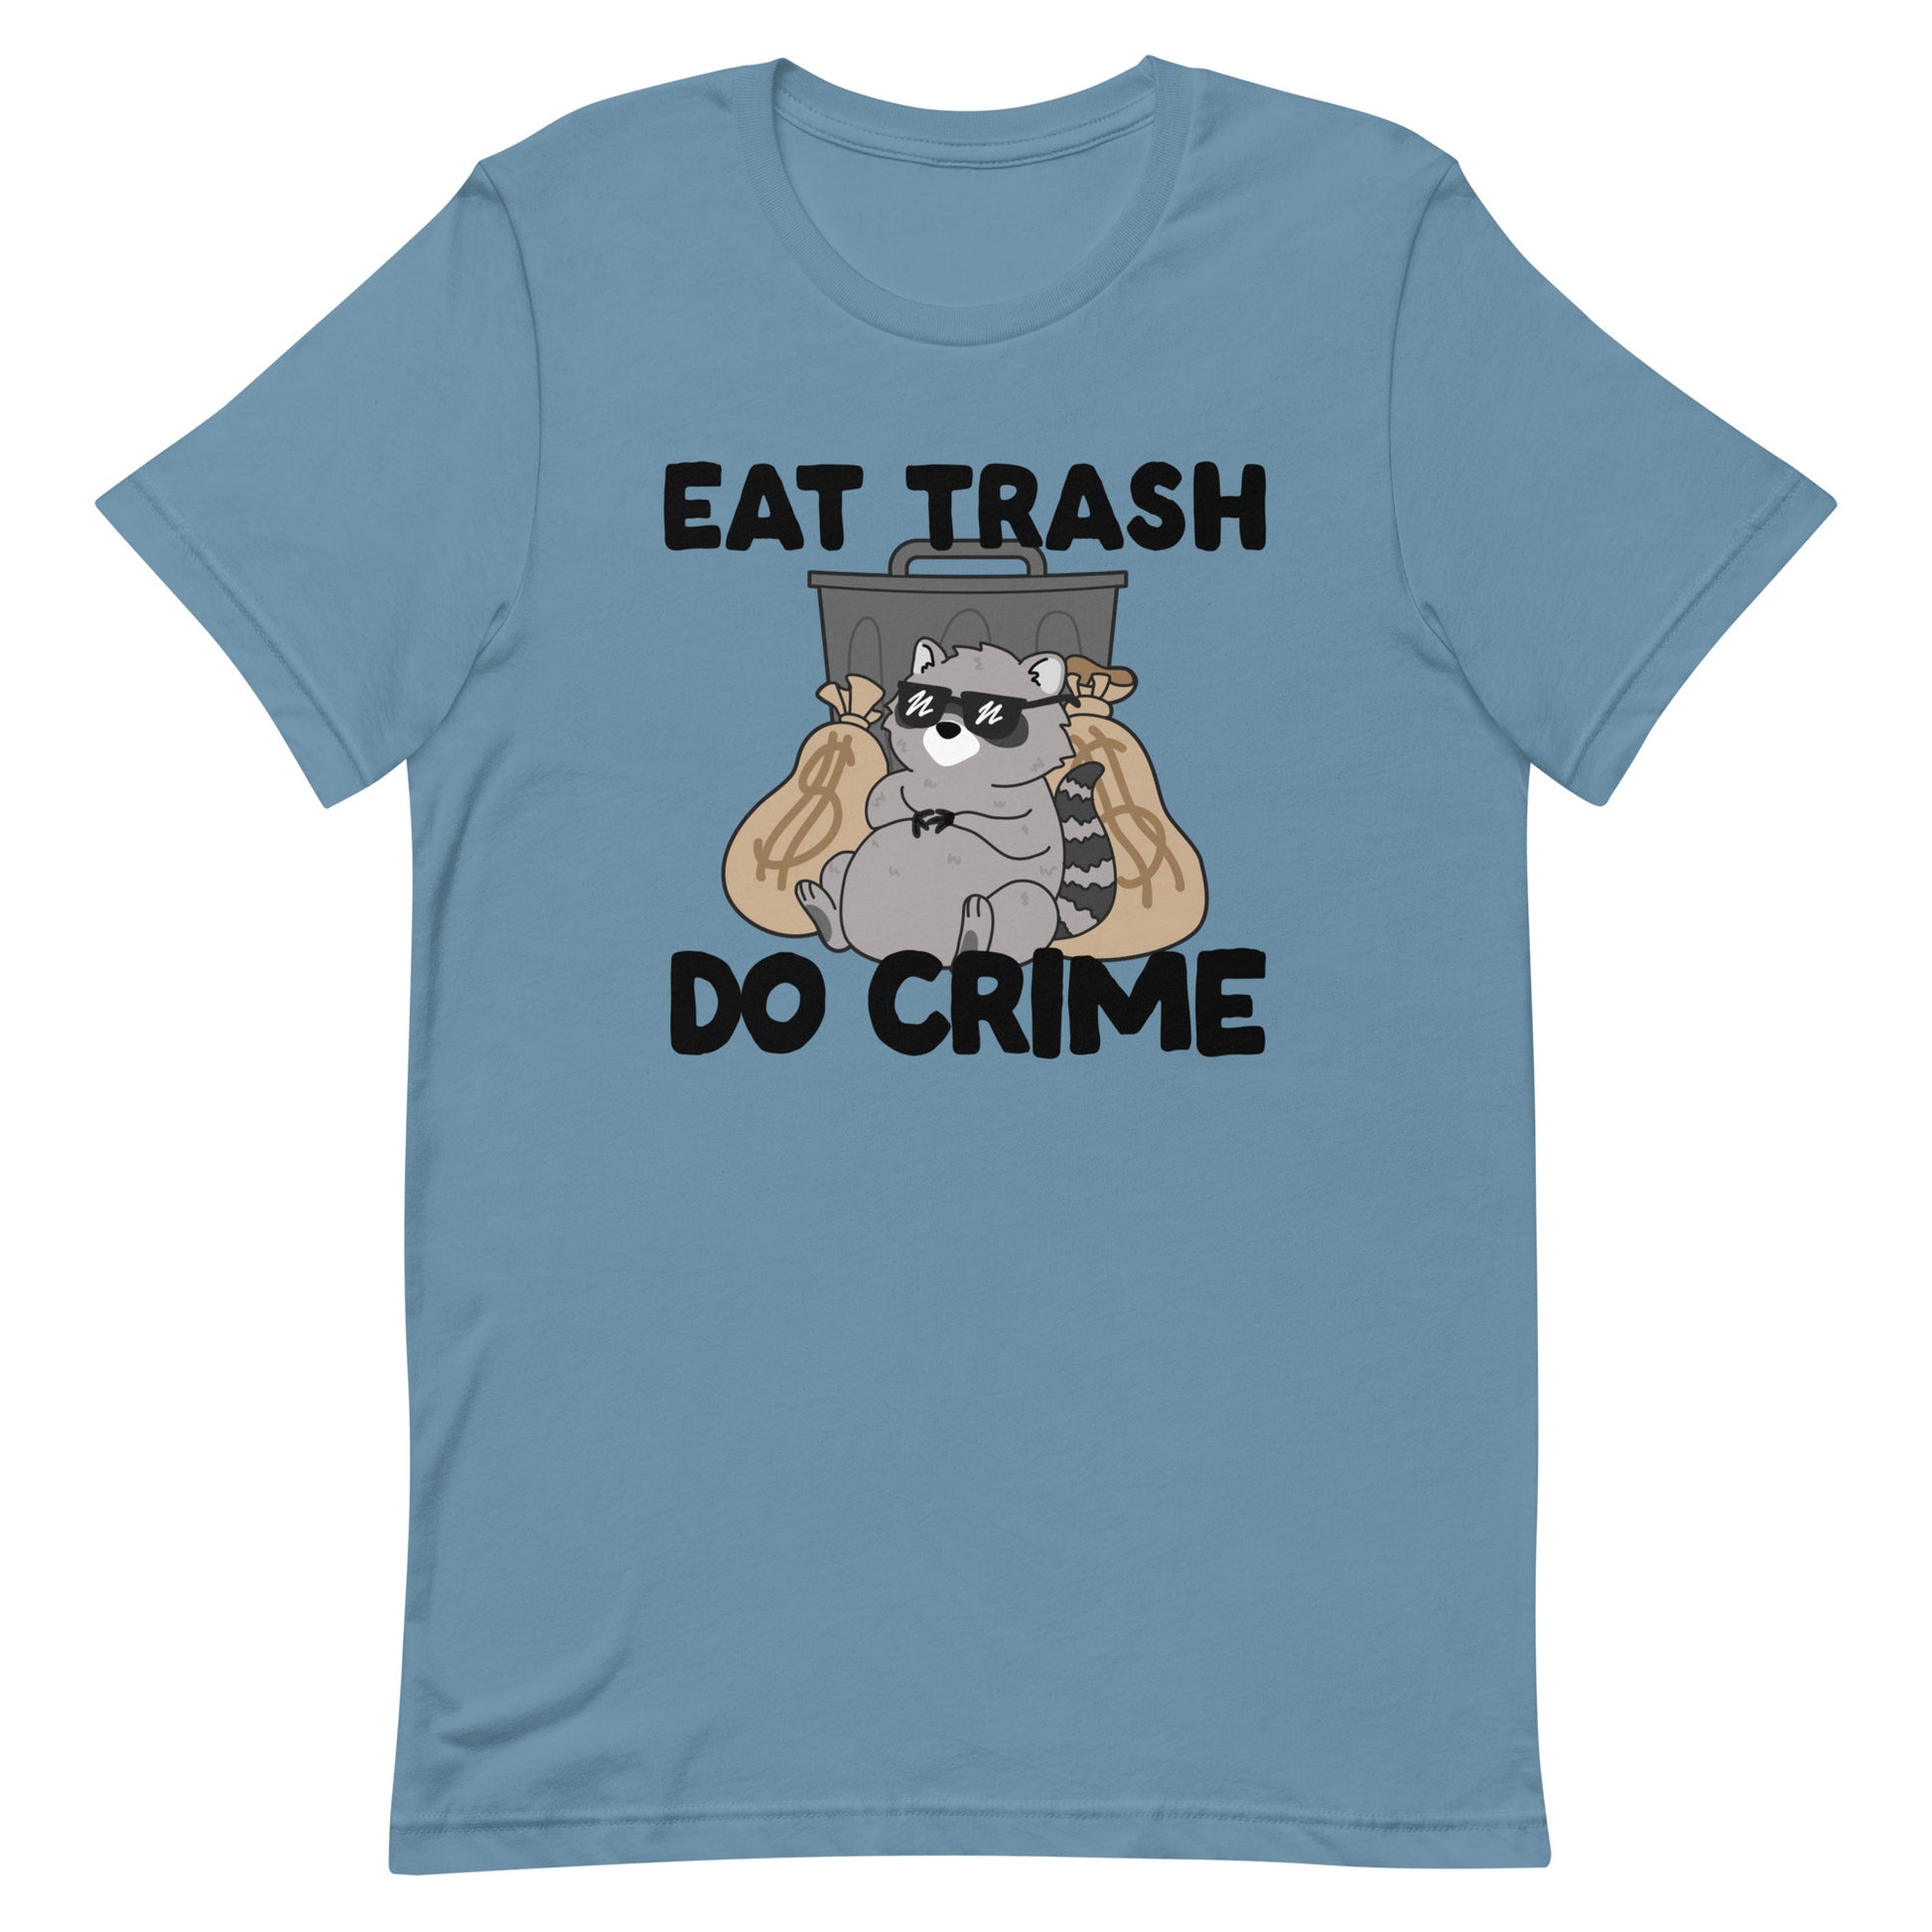 A blue crewneck t-shirt featuing an illustration of a chubby raccoon wearing sunglasses. The raccoon is laying back against a trash can and large bags of money. Text surrounding the image reads "Eat trash. Do crime."